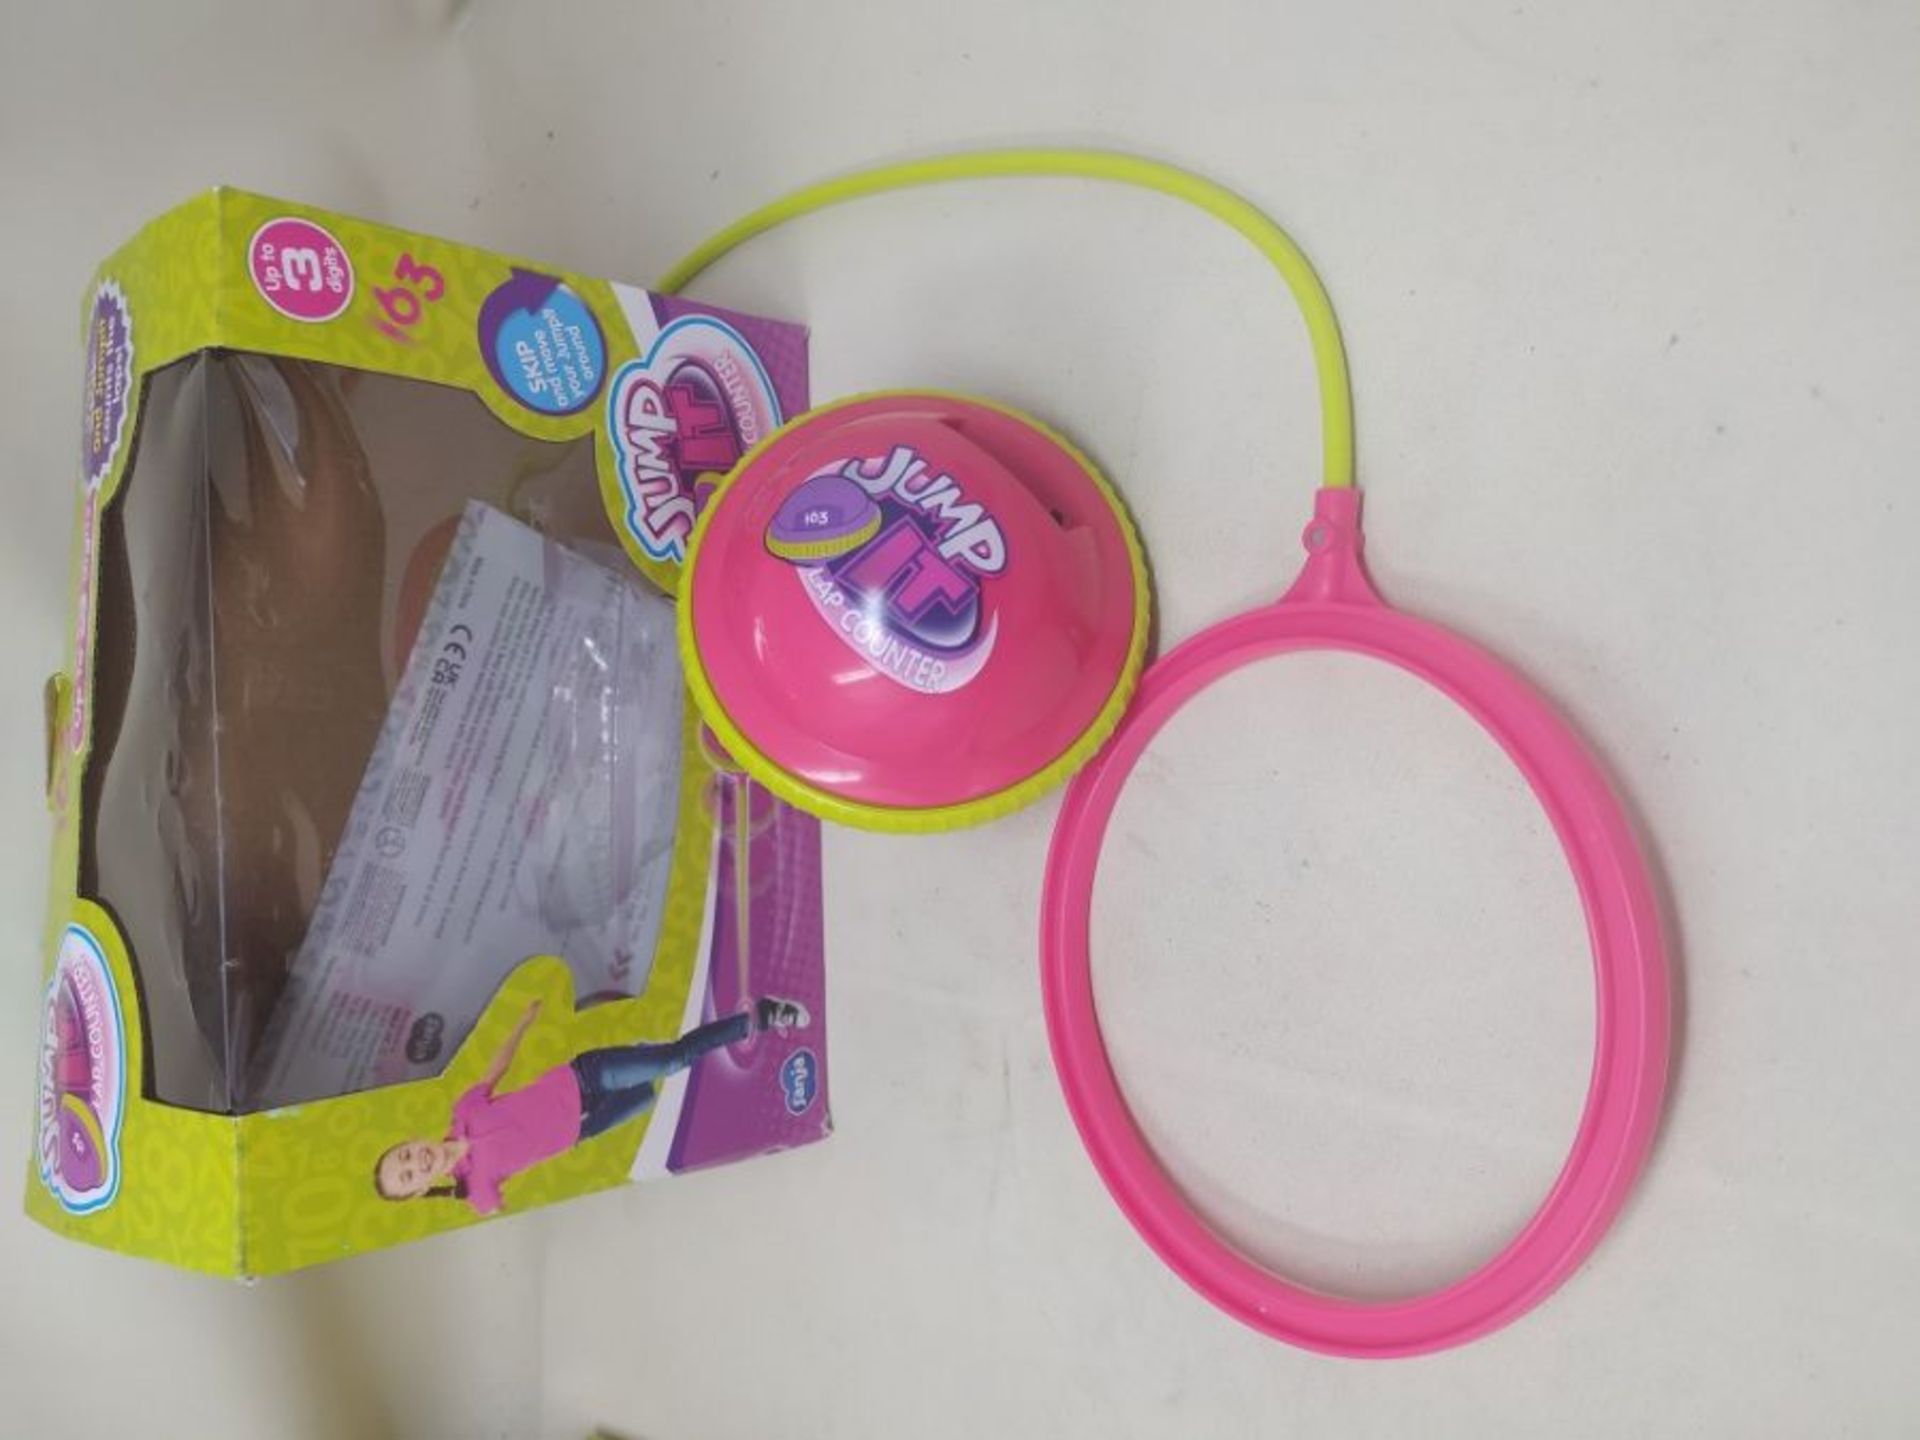 Jump it 07556 Pink-Skipping Fitness Coordination Toy with Counter Upto 1,000 laps for - Image 2 of 2